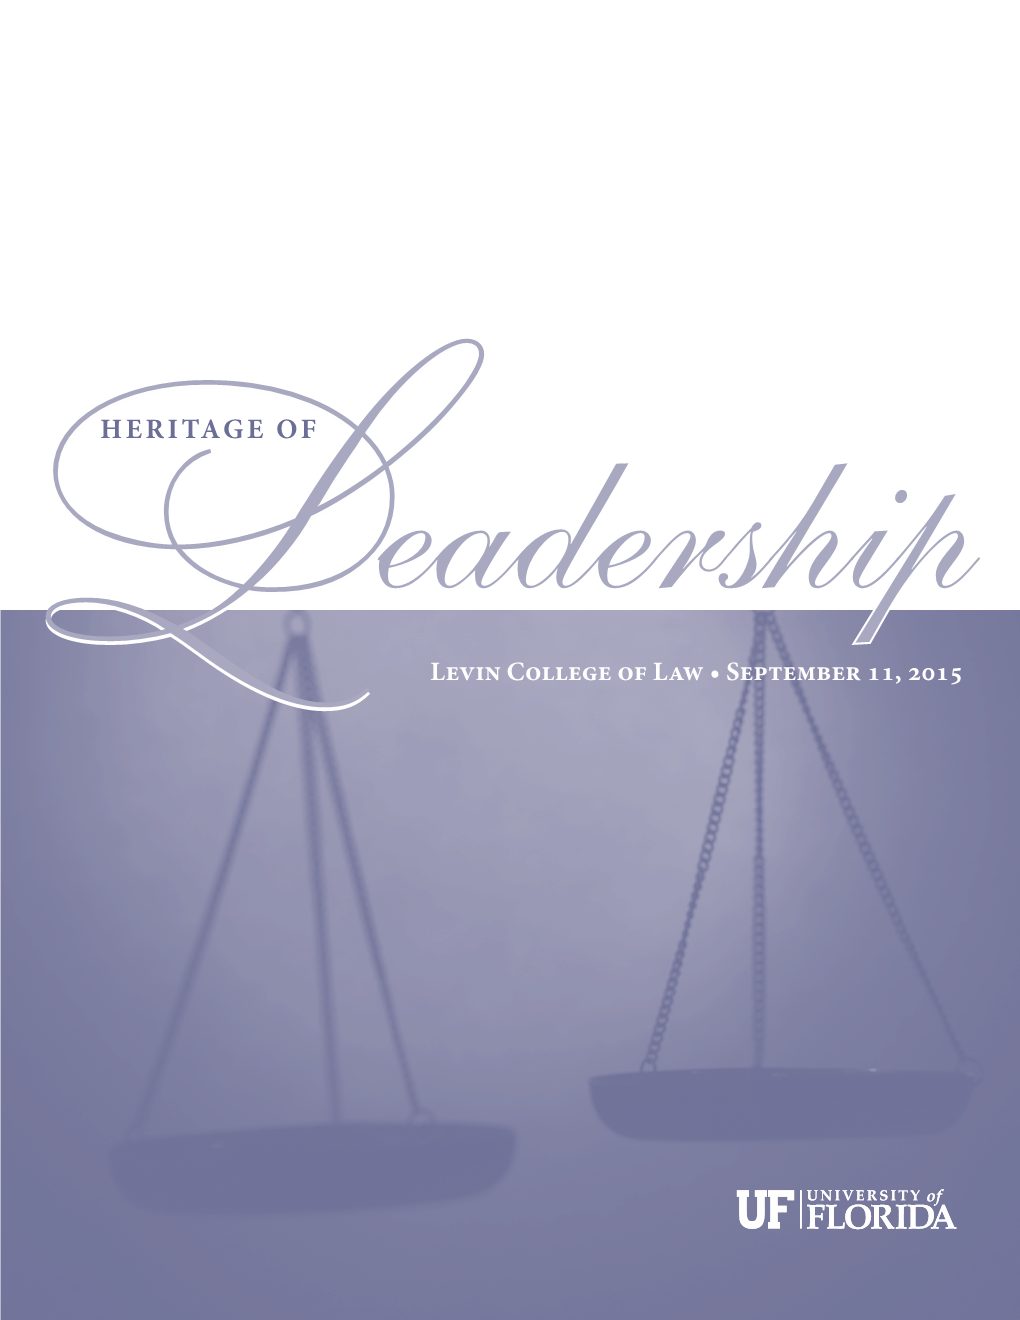 HERITAGE of Eadership Levin College of Law • September 11, 2015 Past Inductees